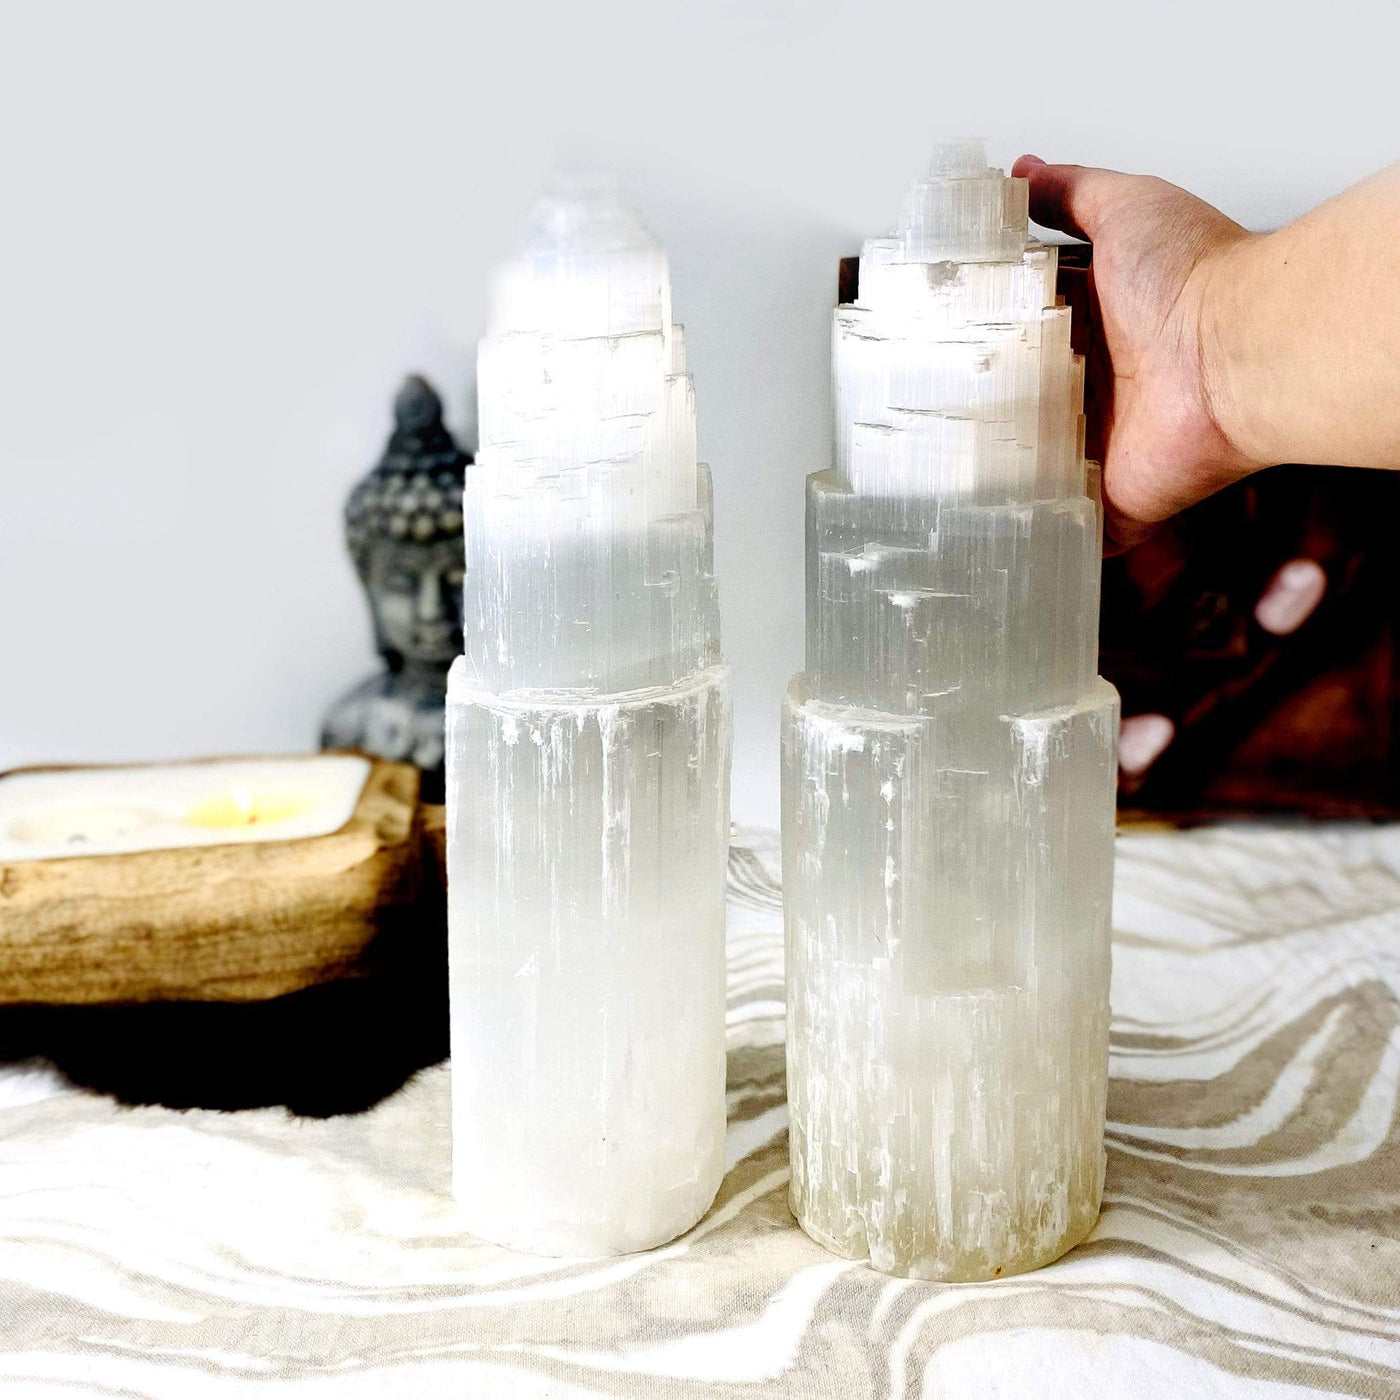 two selenite lamps side by side with a hand next to the one on the right.